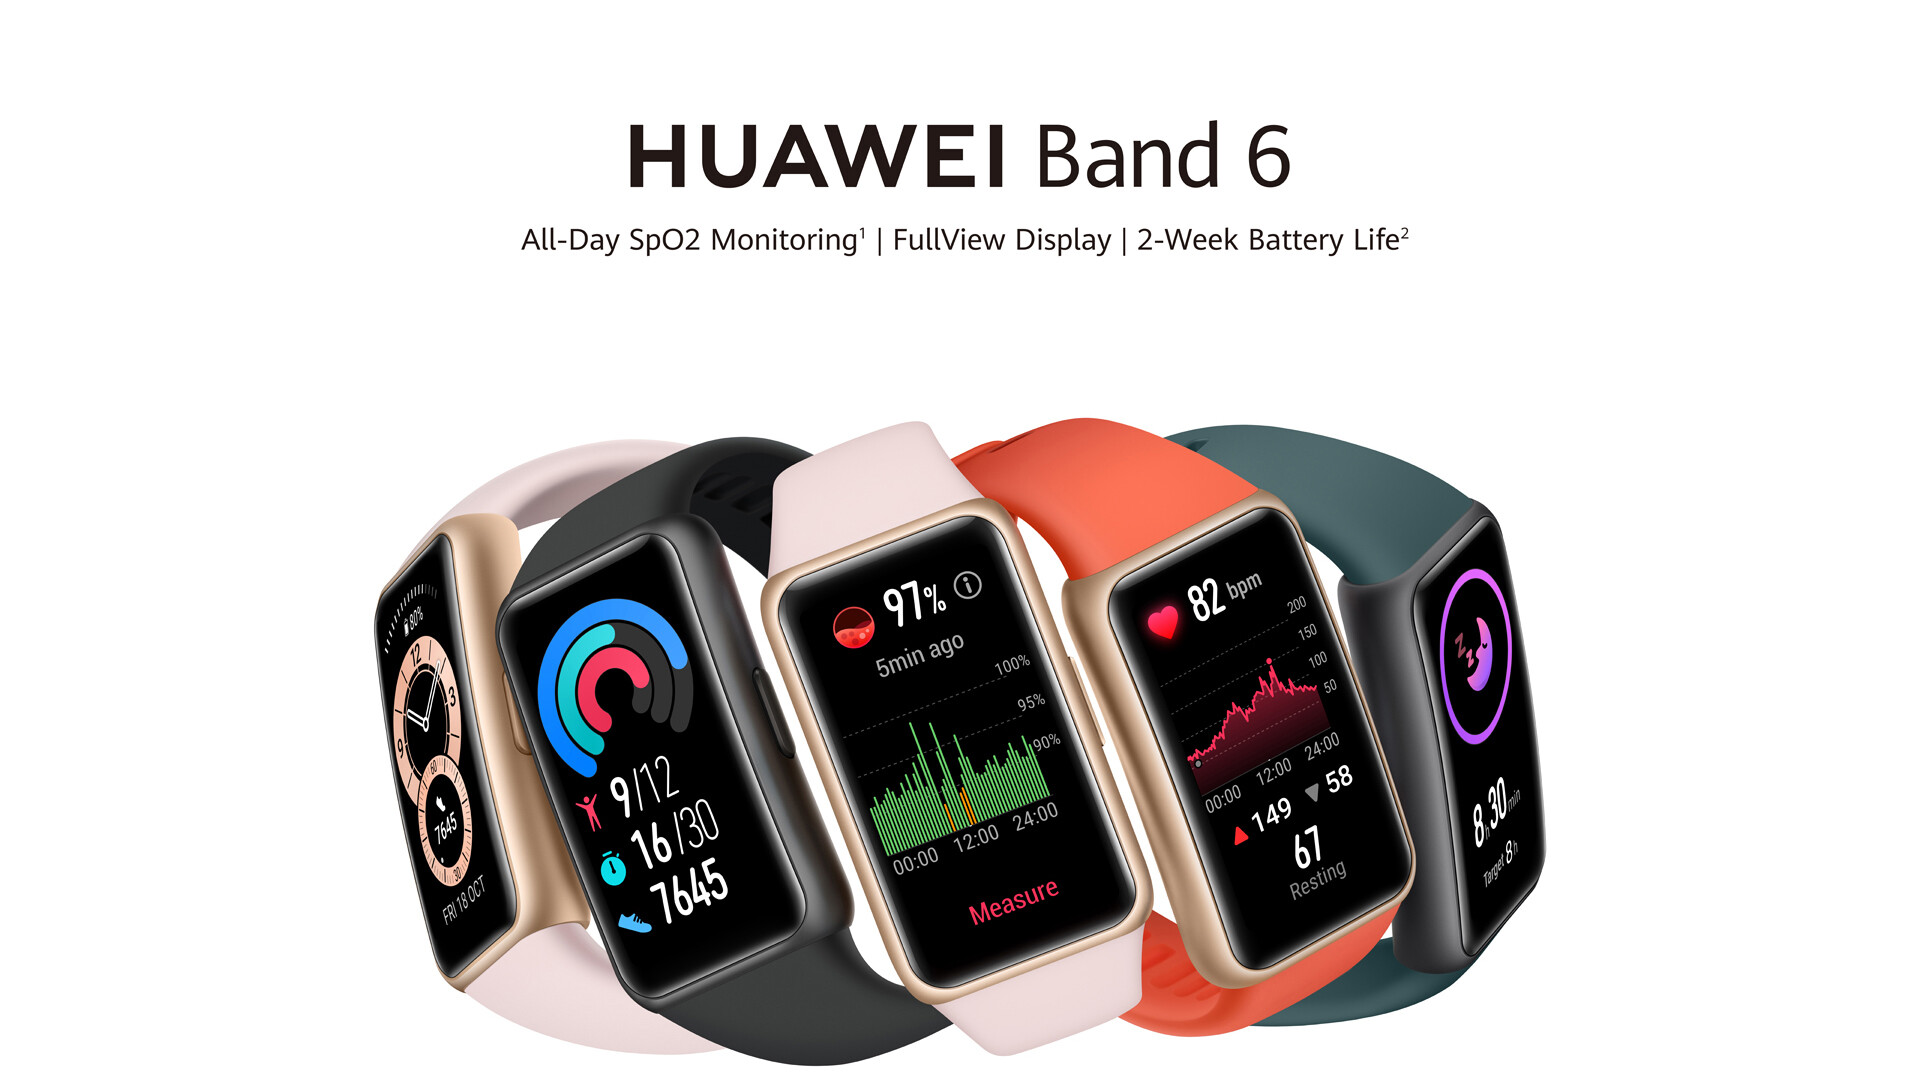 Huawei band 6 featured image